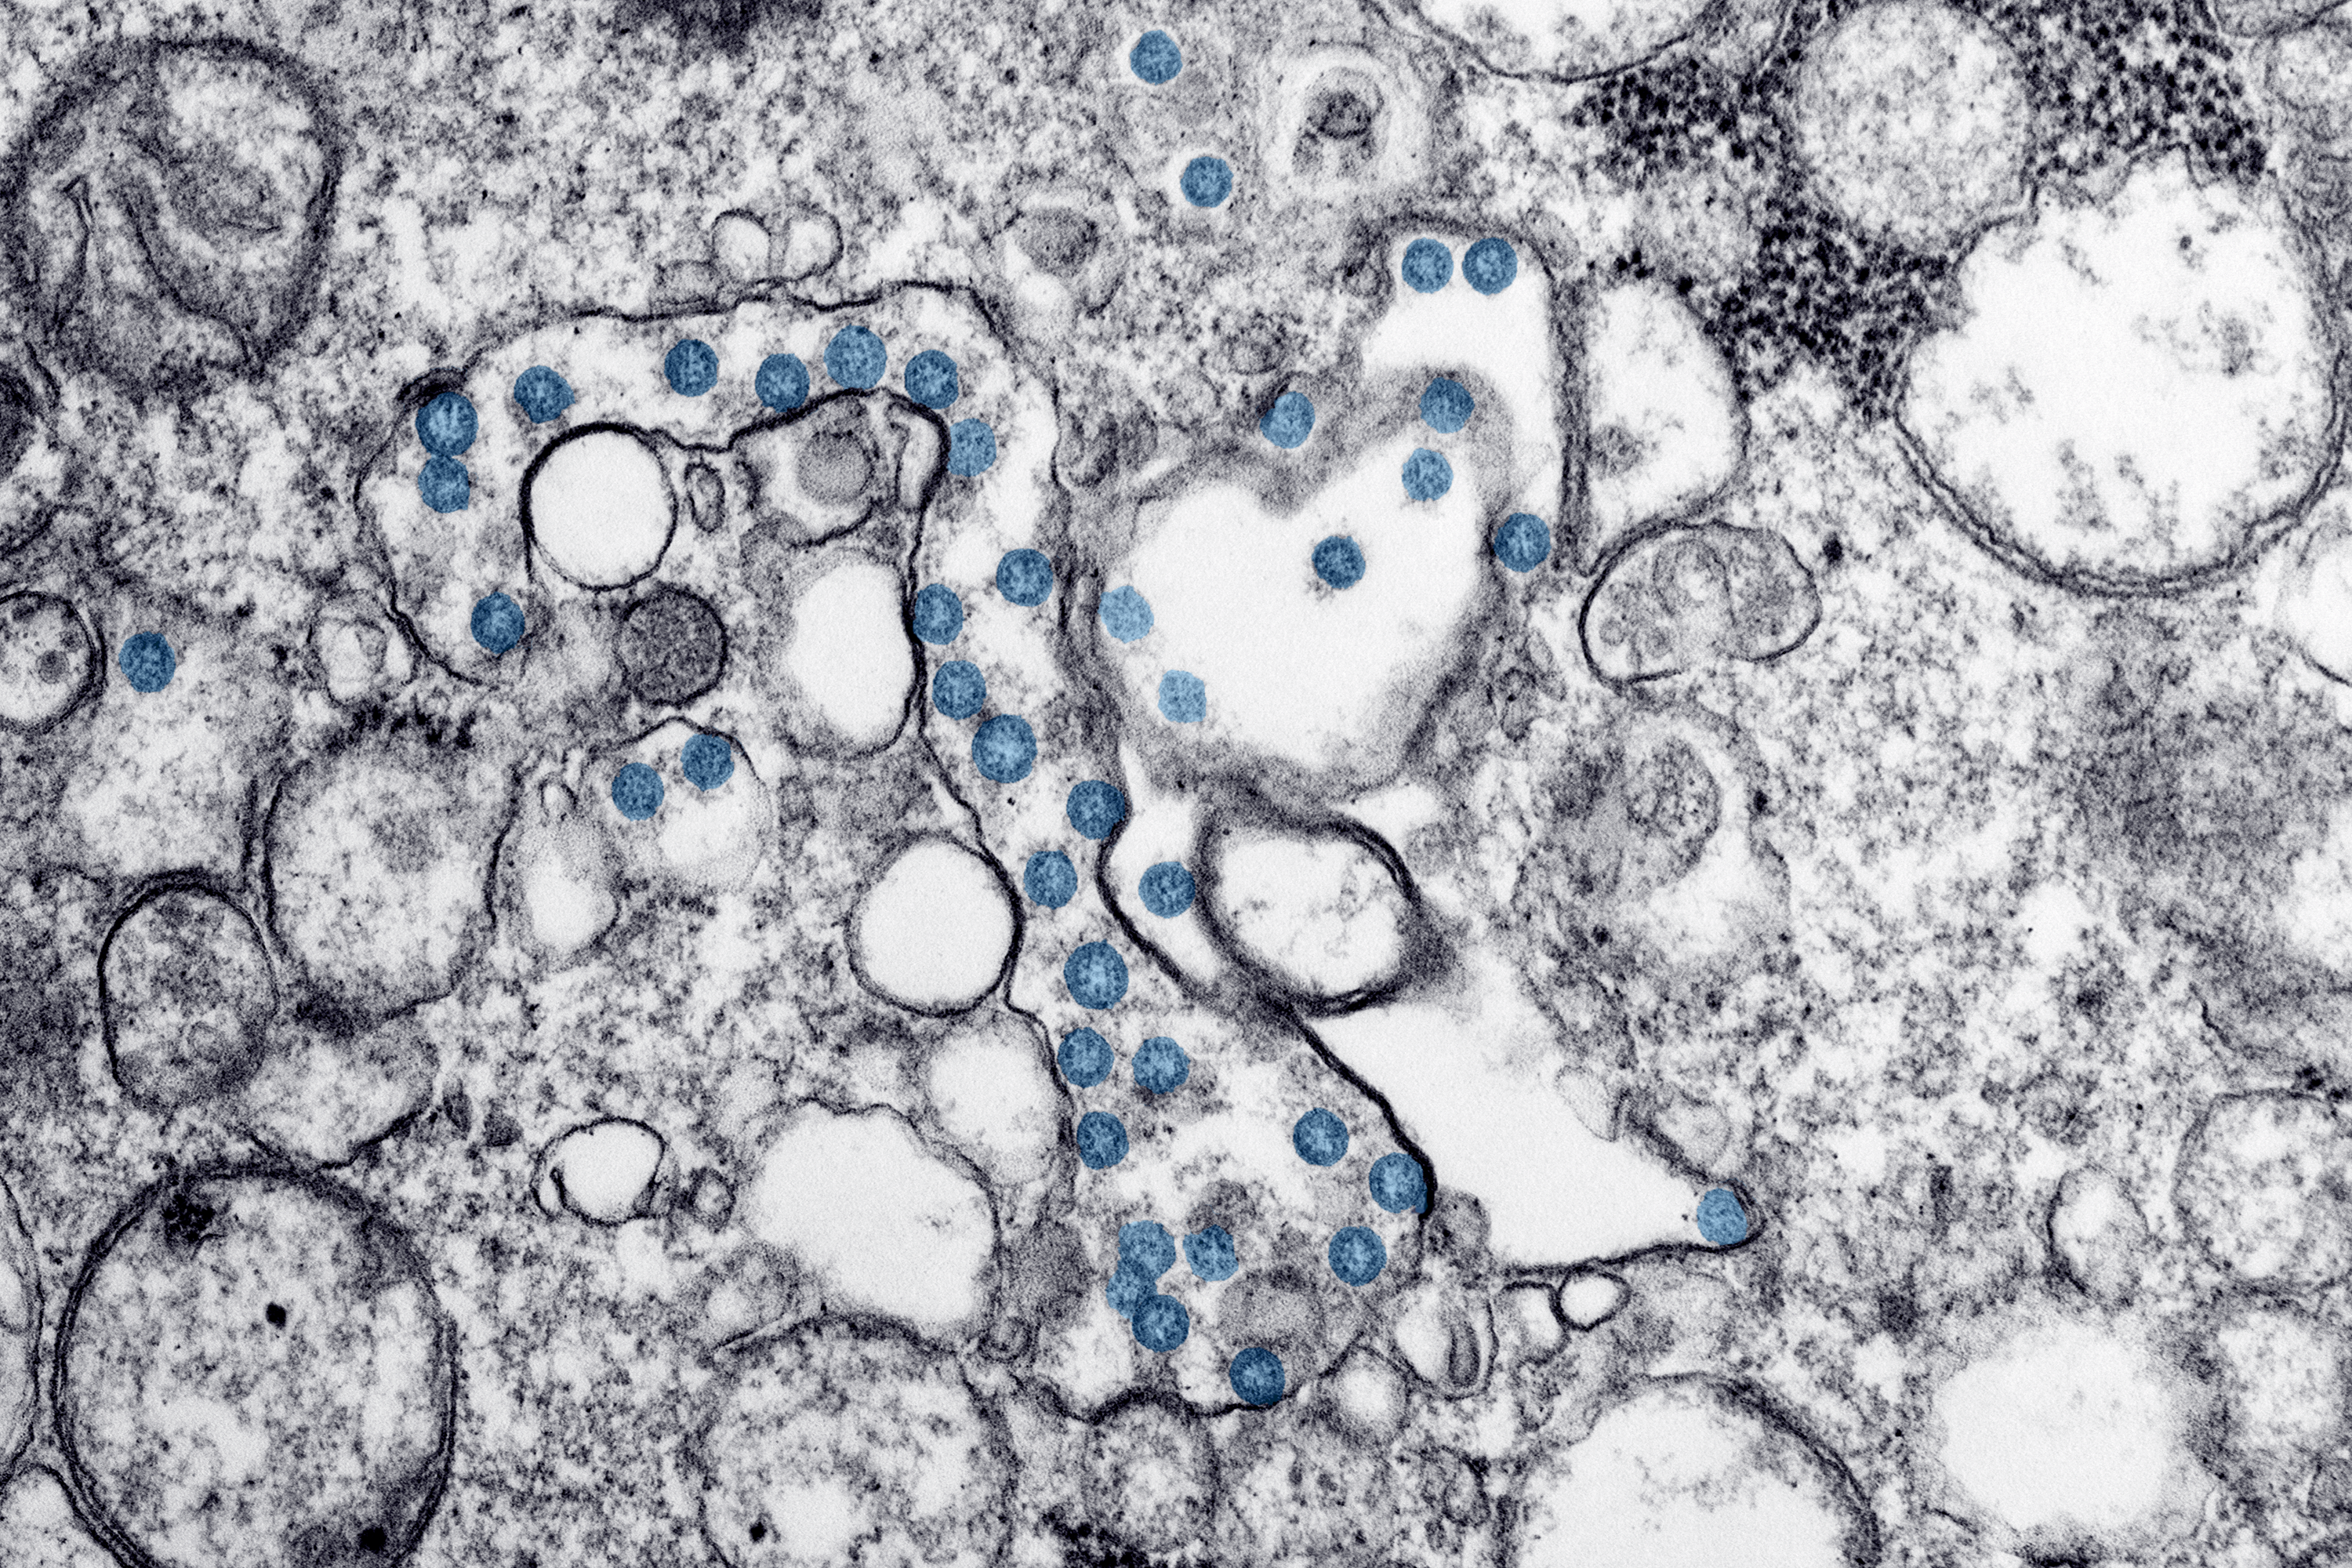 A transmission electron microscopic image of coronavirus particles, colored blue, in a patient sample. The virus's genetic material can be seen as little black dots within the blue particles.